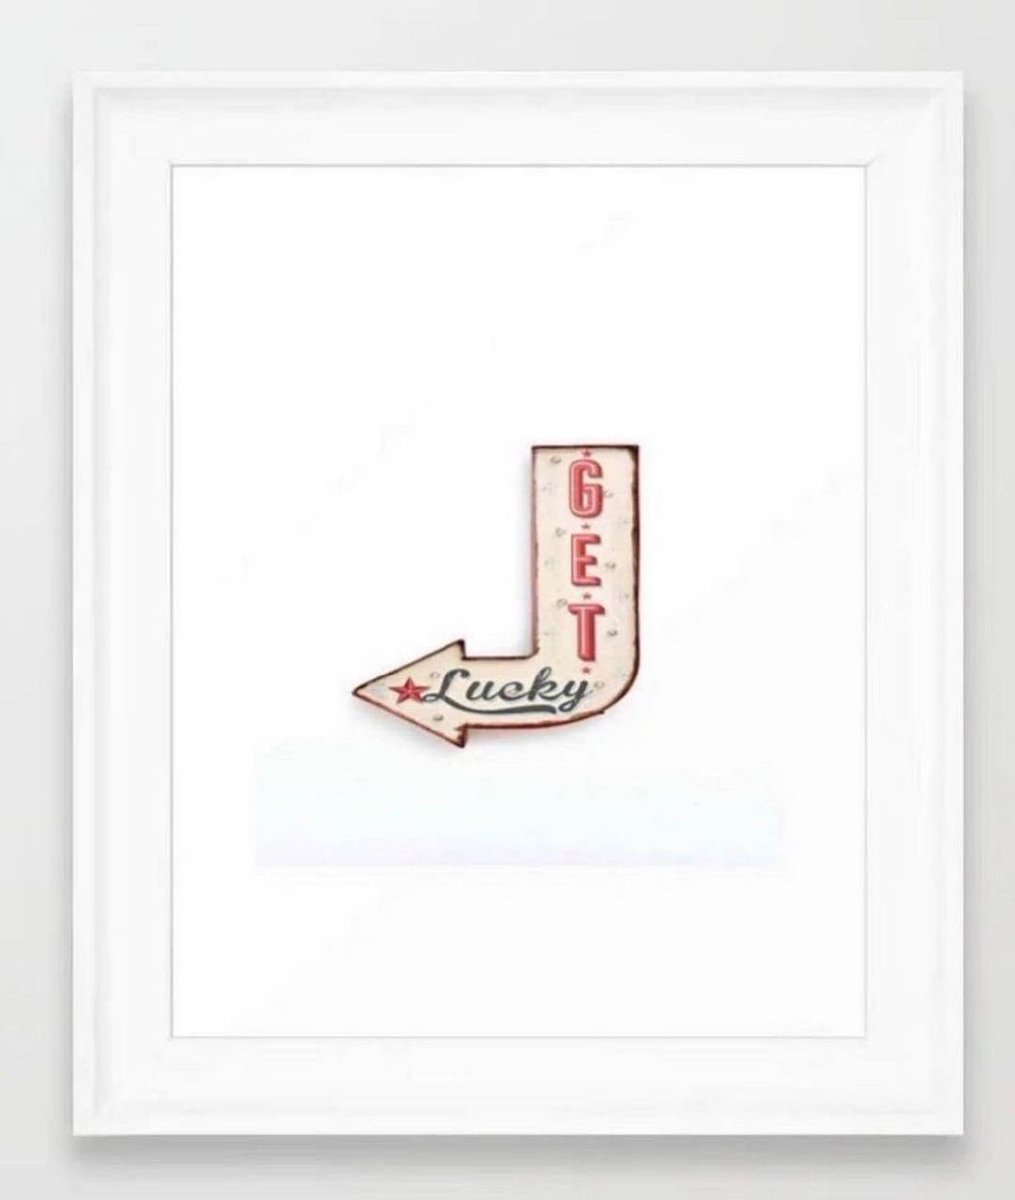 ⭐️Get Lucky⭐️

A couple of the many products available in this print.

Society6.com/wankerandwanker 

#lucky #getlucky #life #love #sale #relationships #play #party #shopping #gift #onlineshopping #shoppingonline #christmas